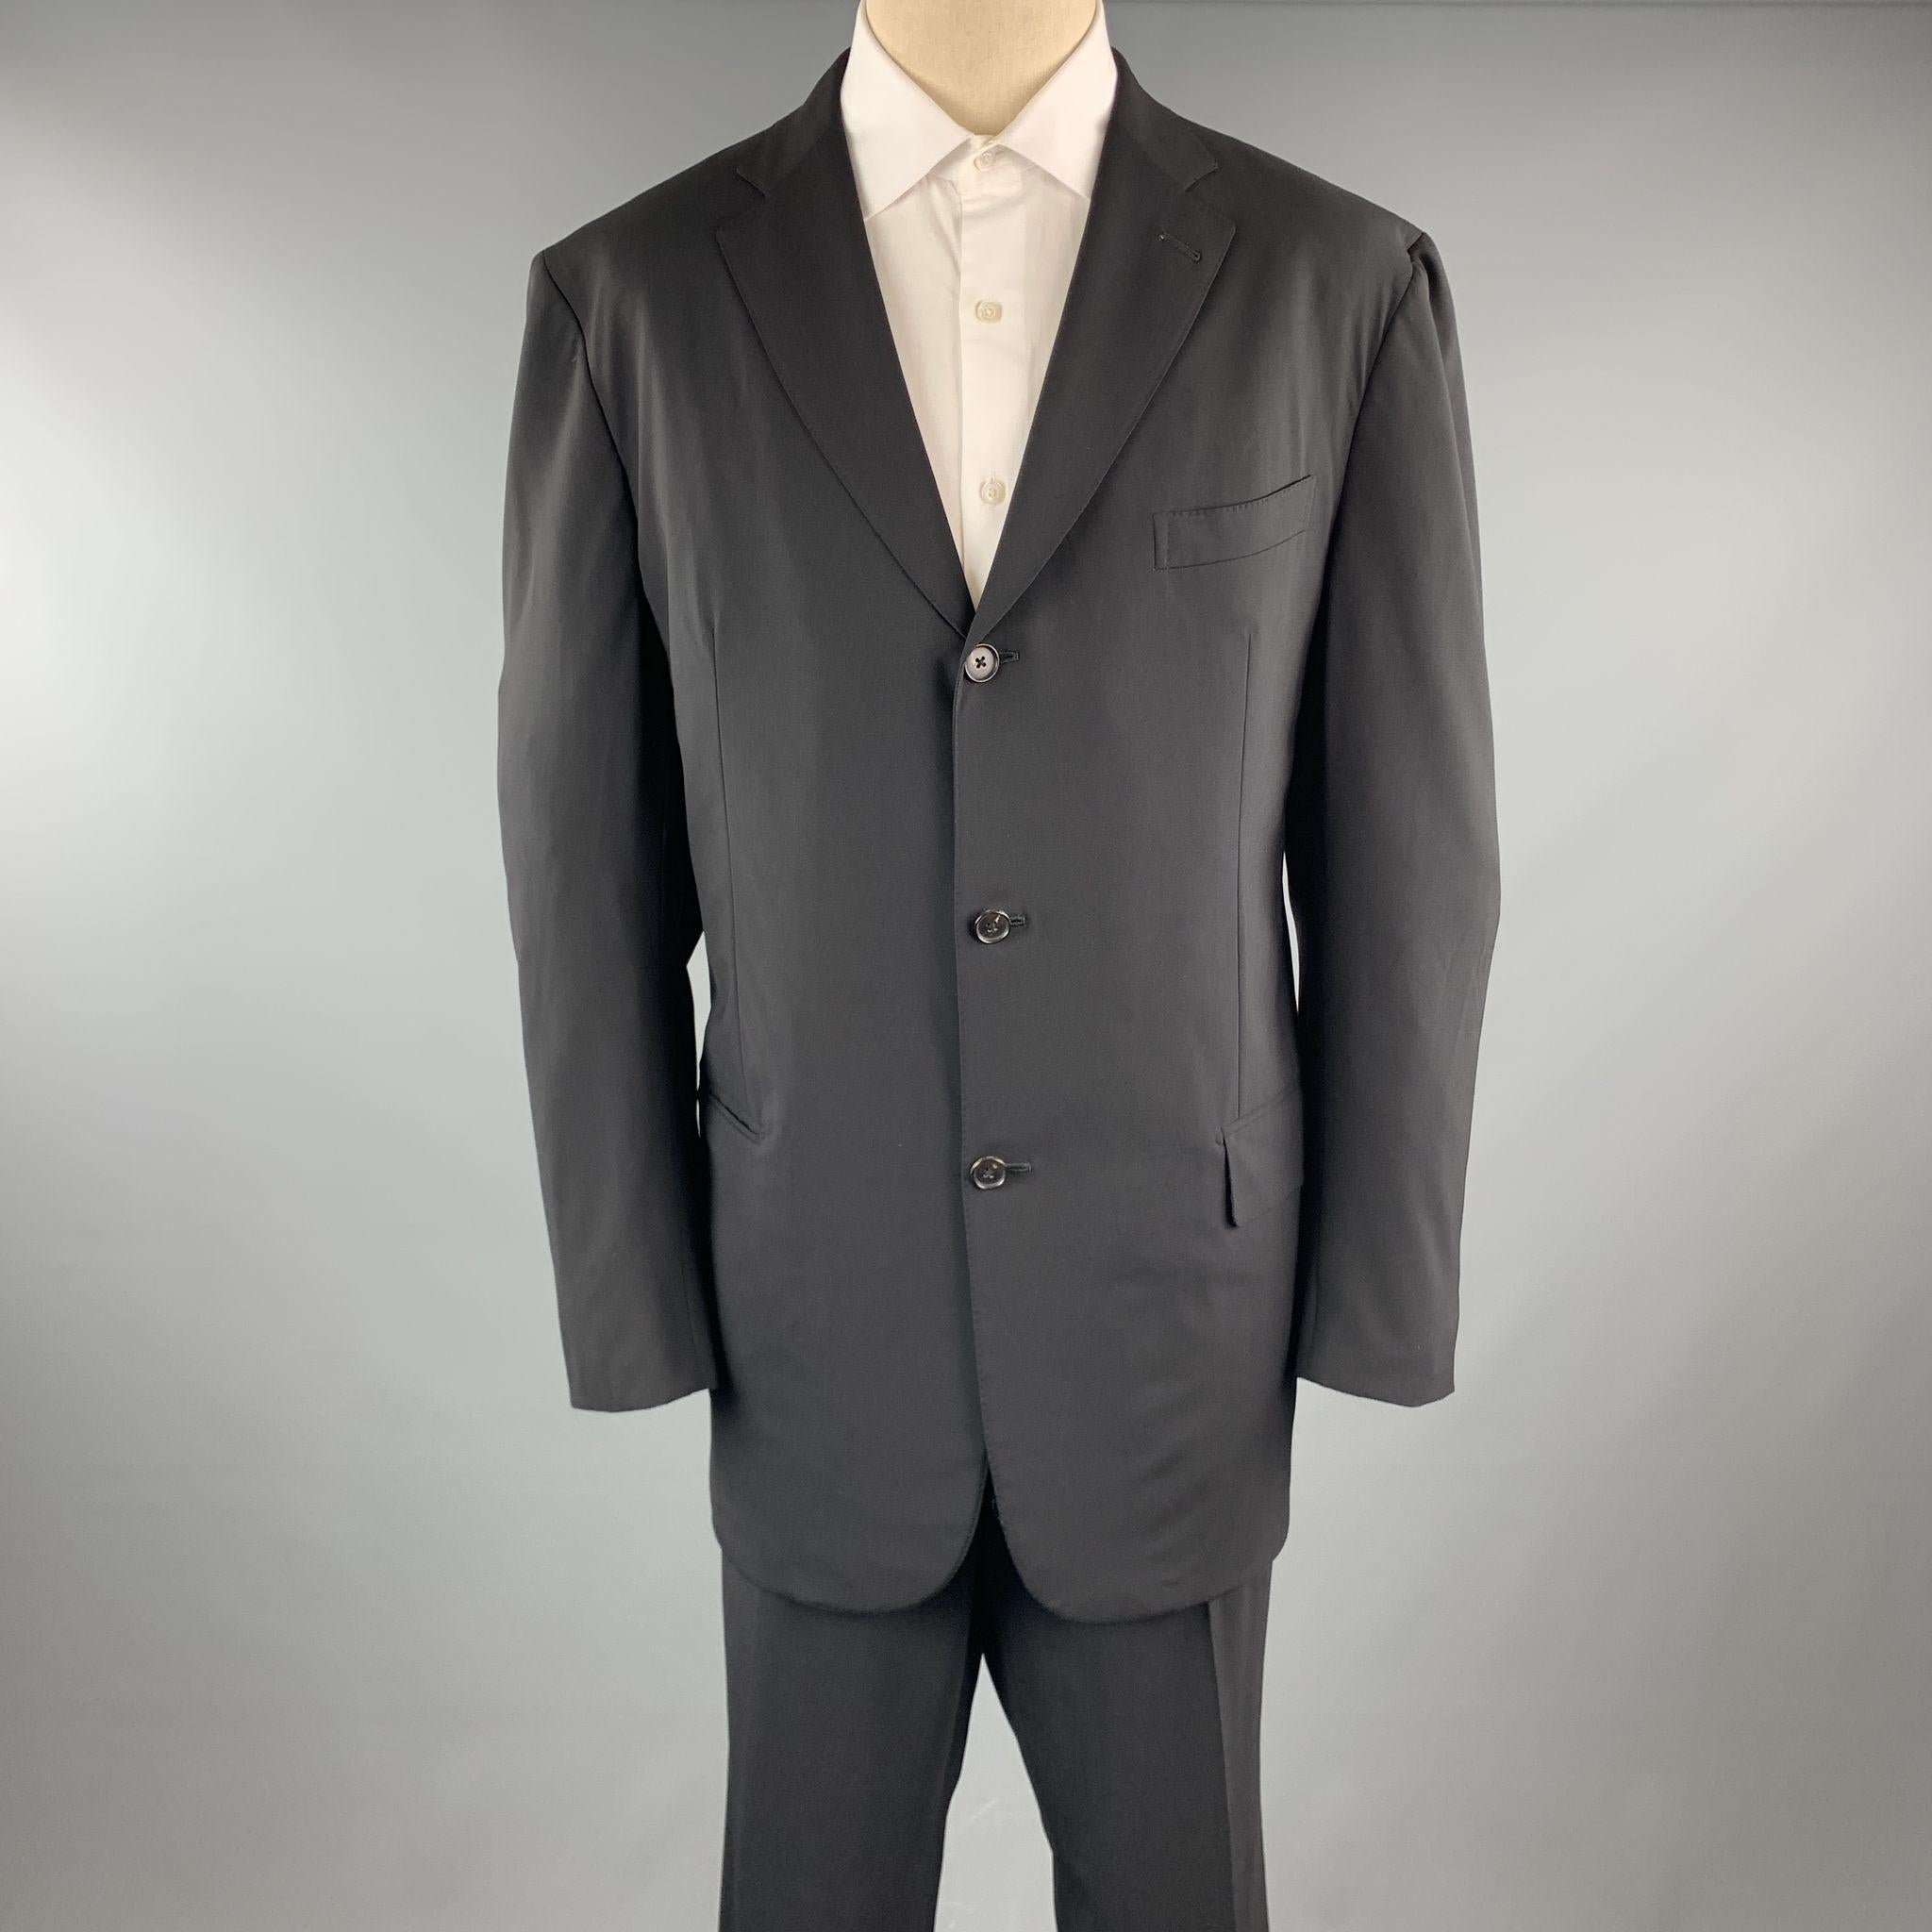 GIANLUCA ISAIA long suit comes in a black wool and includes a single breasted, three button sport coat with a notch lapel and matching front trousers. As-Is. Made in Italy.

Good Pre-Owned Condition.
Marked: 56

Measurements:

-Jacket
Shoulder: 20